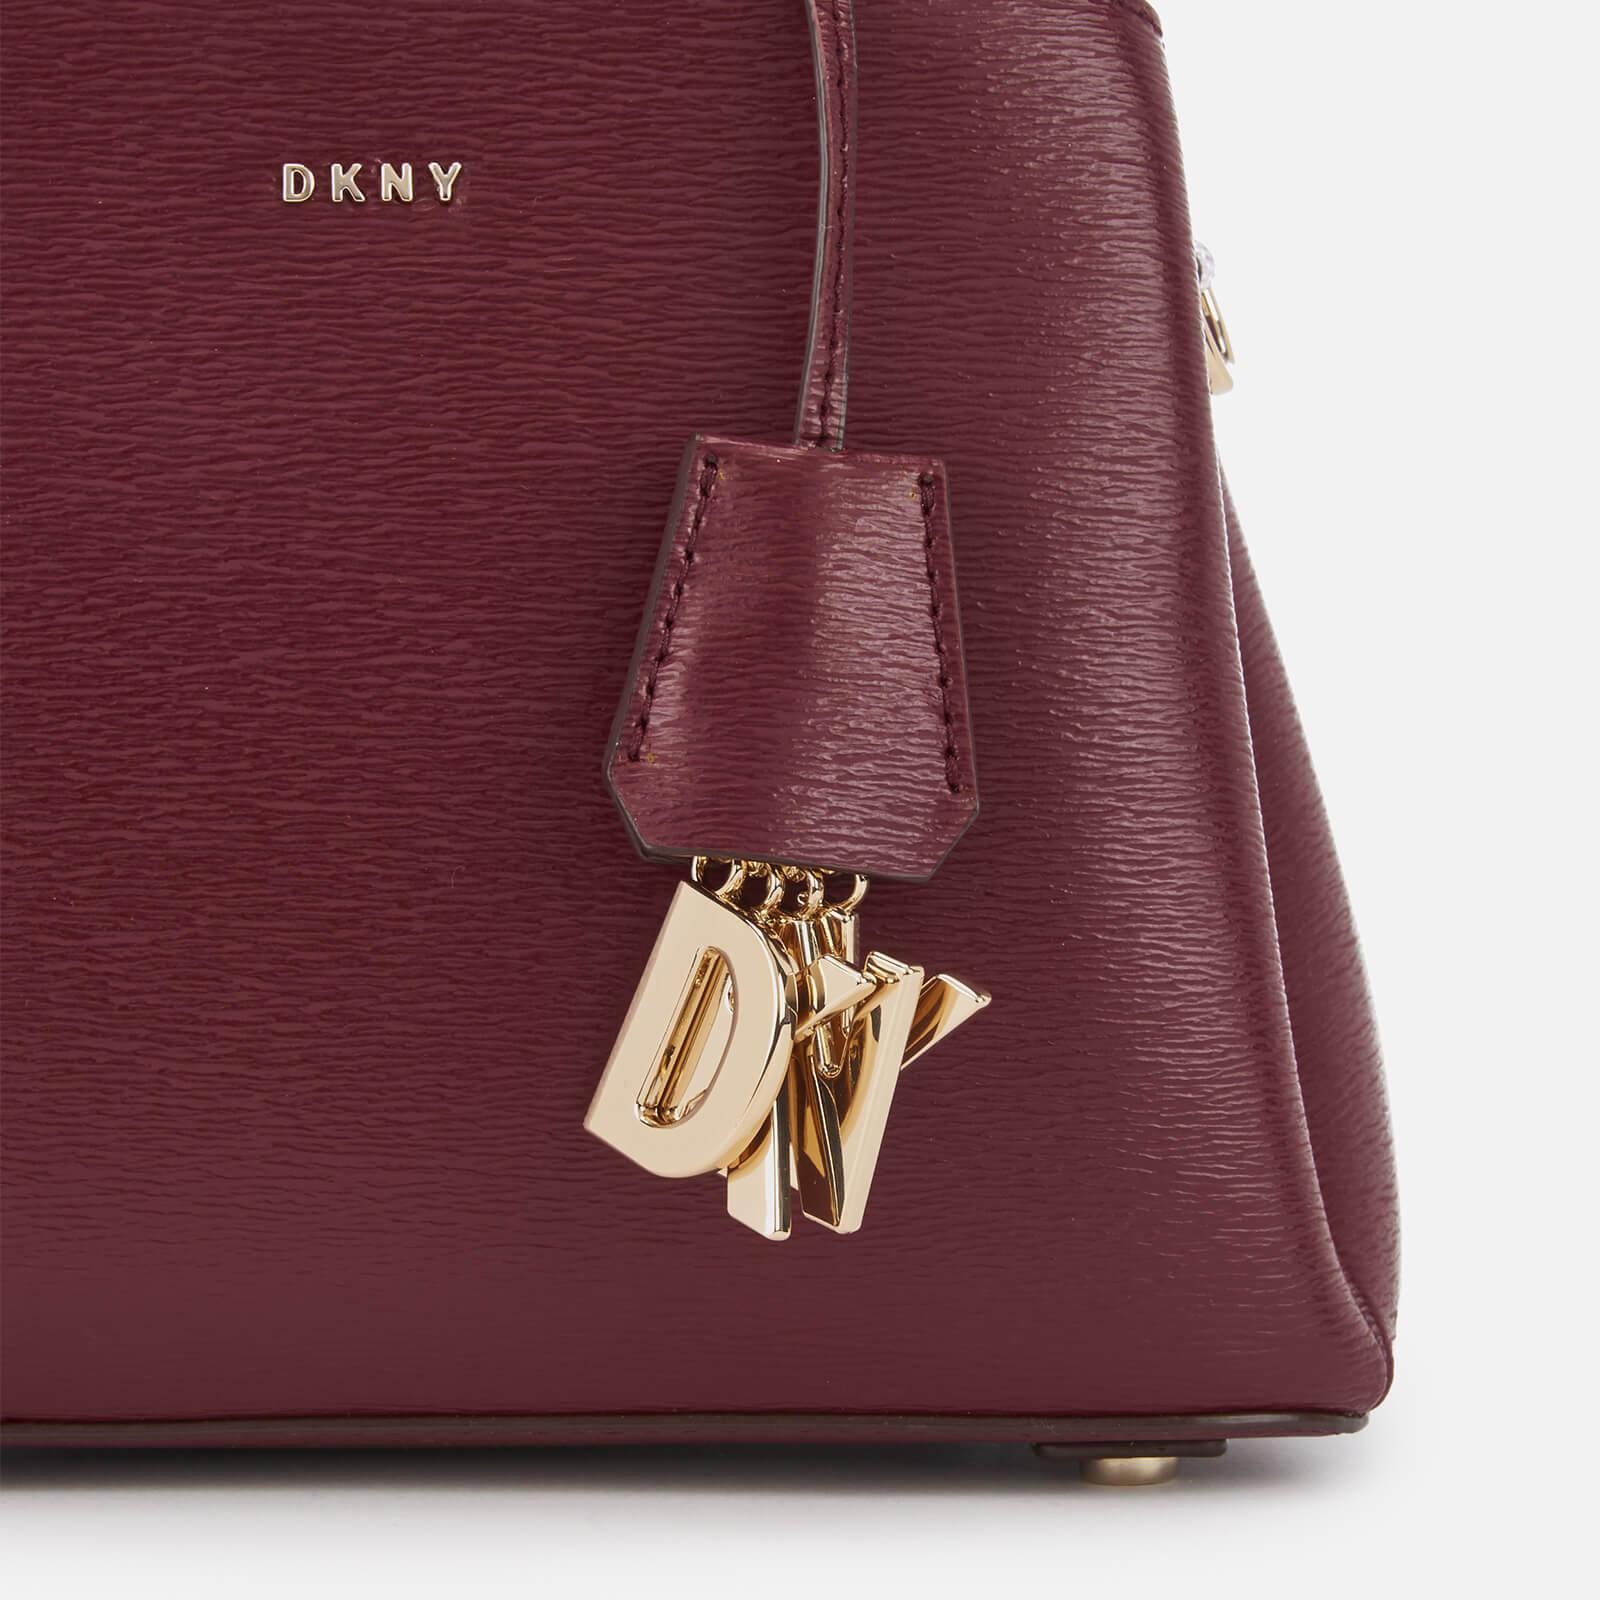 DKNY Paige Small Satchel | Lyst Canada